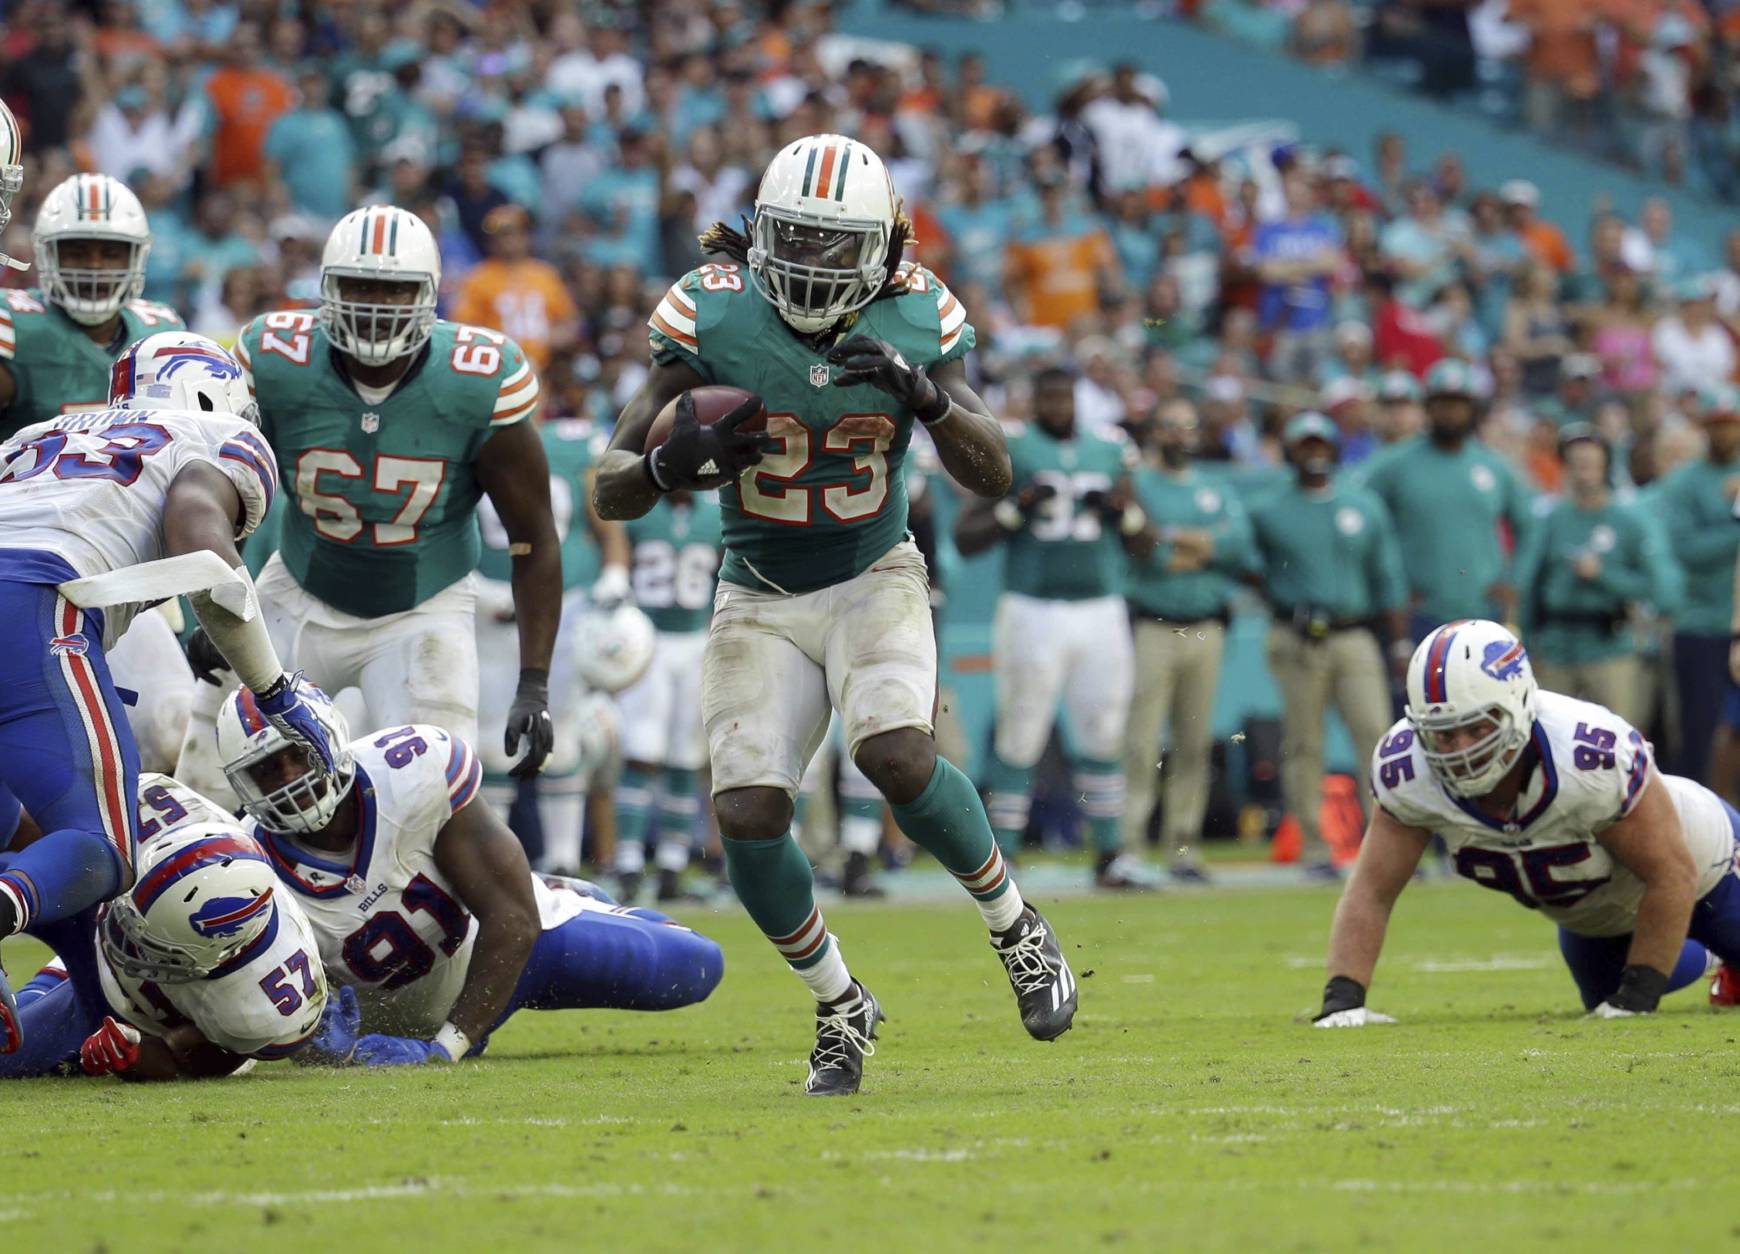 Miami Dolphins running back Jay Ajayi (23) runs the ball, during the second half of an NFL football gam against the Buffalo Bills, Sunday, Oct. 23, 2016, in Miami Gardens, Fla. (AP Photo/Lynne Sladky)